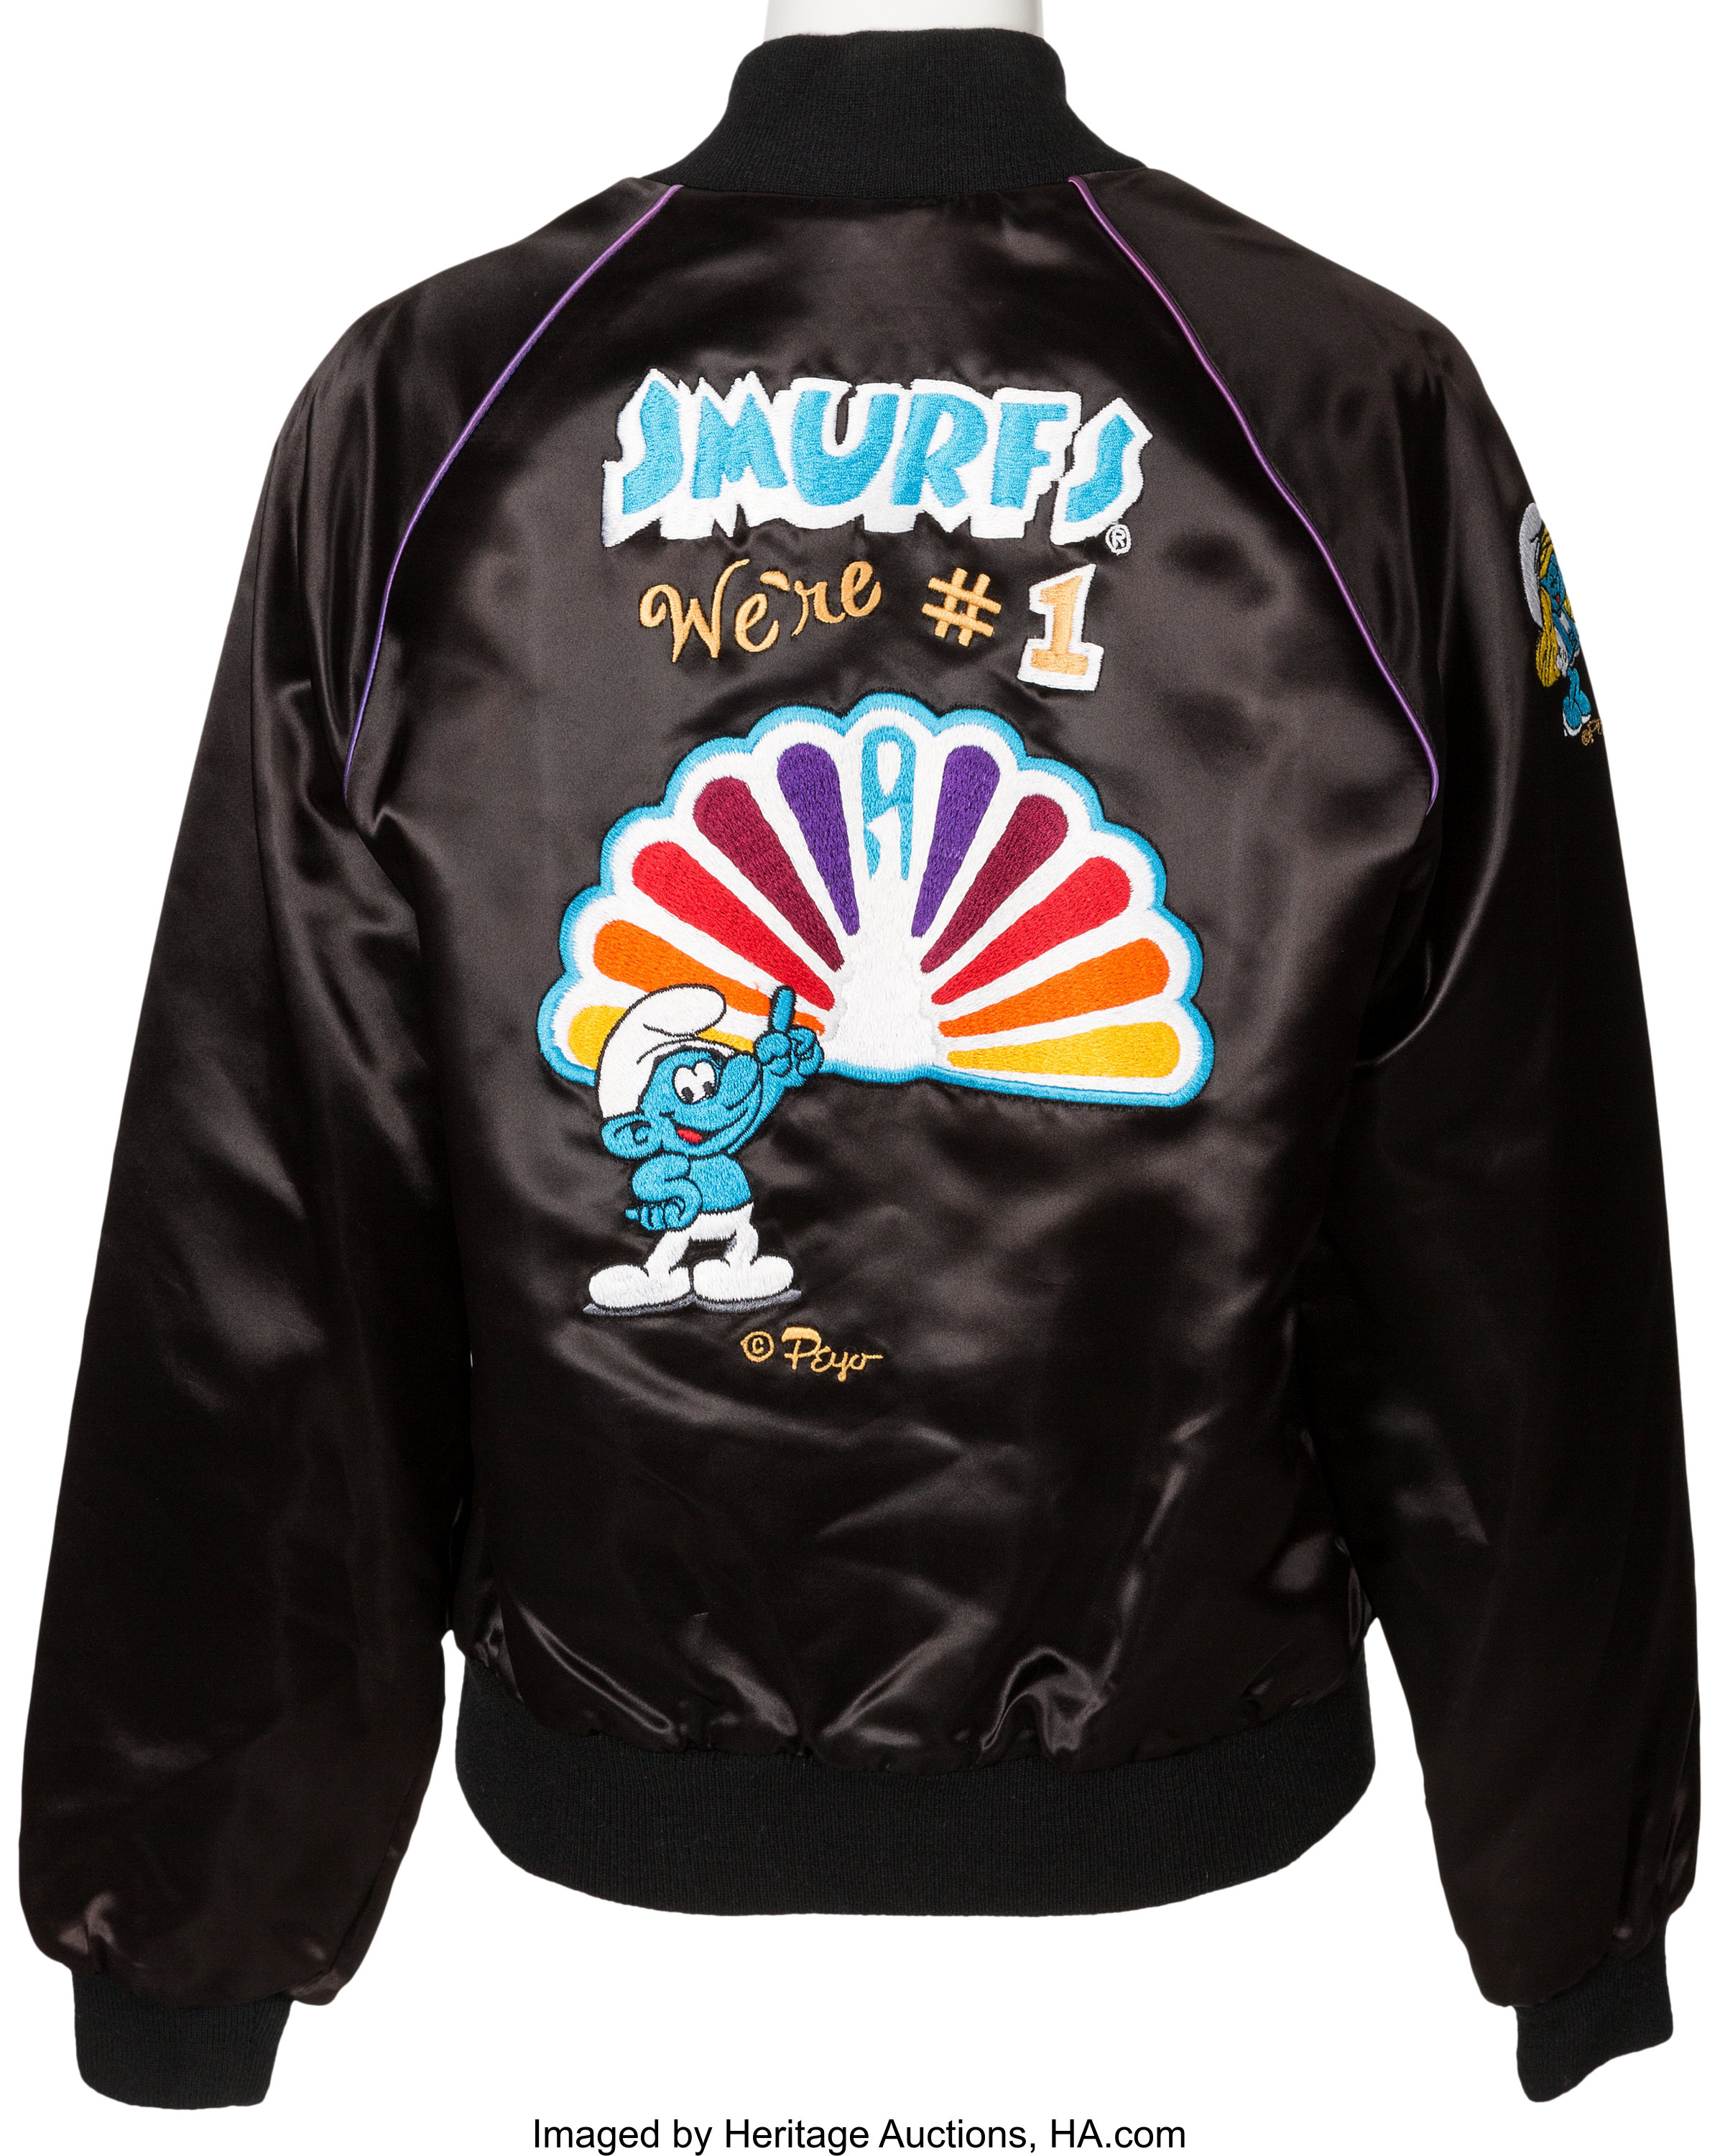 The Smurfs Crew Jacket Owned by Lucille 